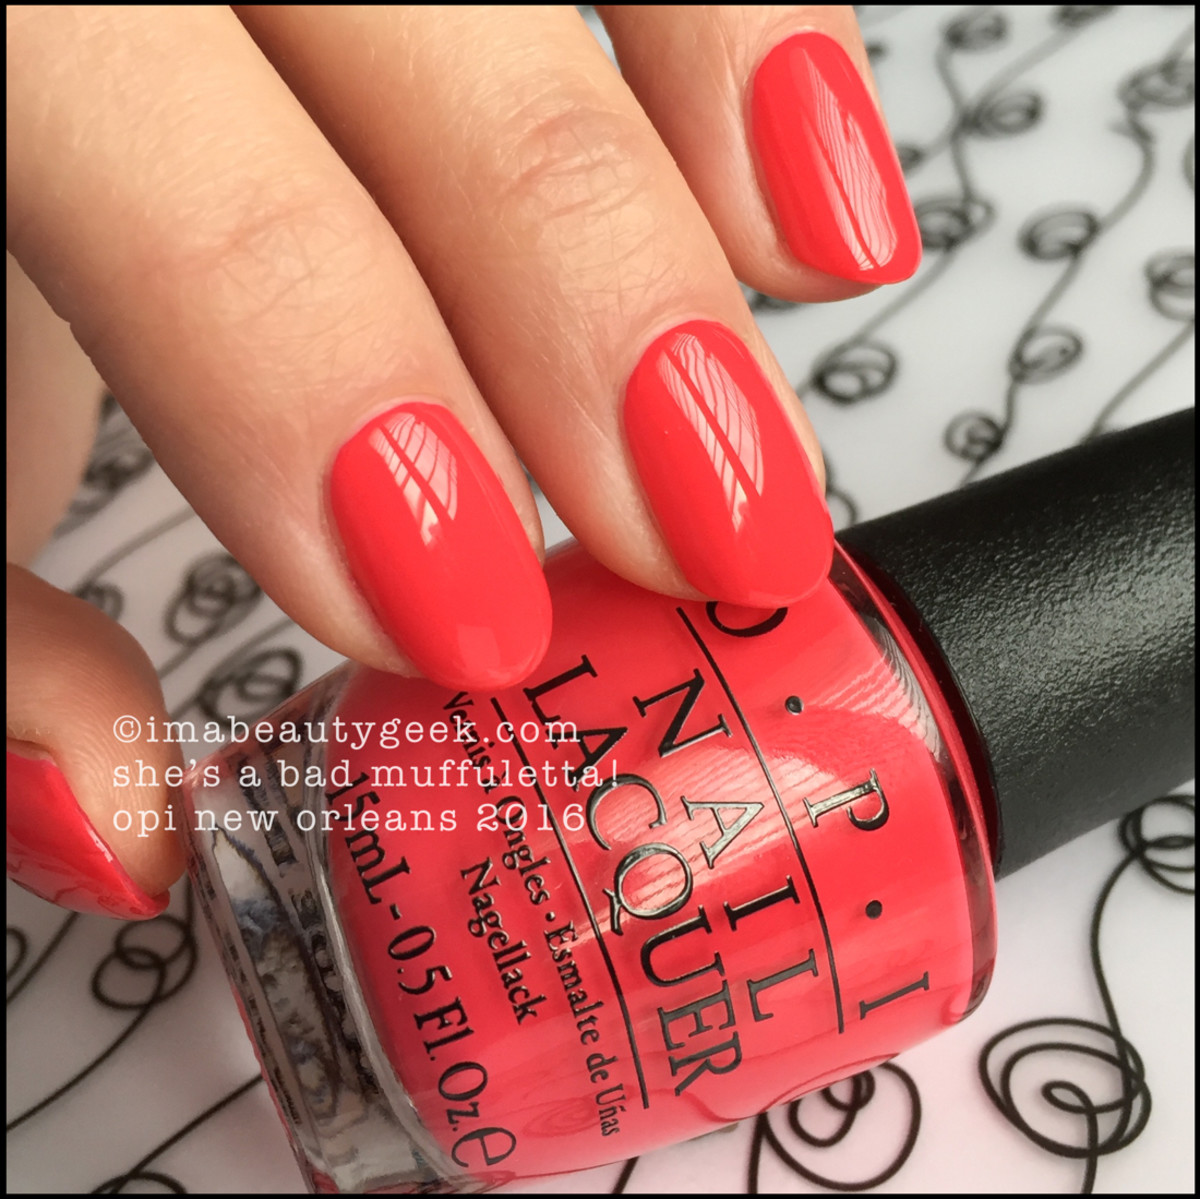 OPI Shes a Bad Muffuletta_OPI New Orleans 2016 Swatches Review